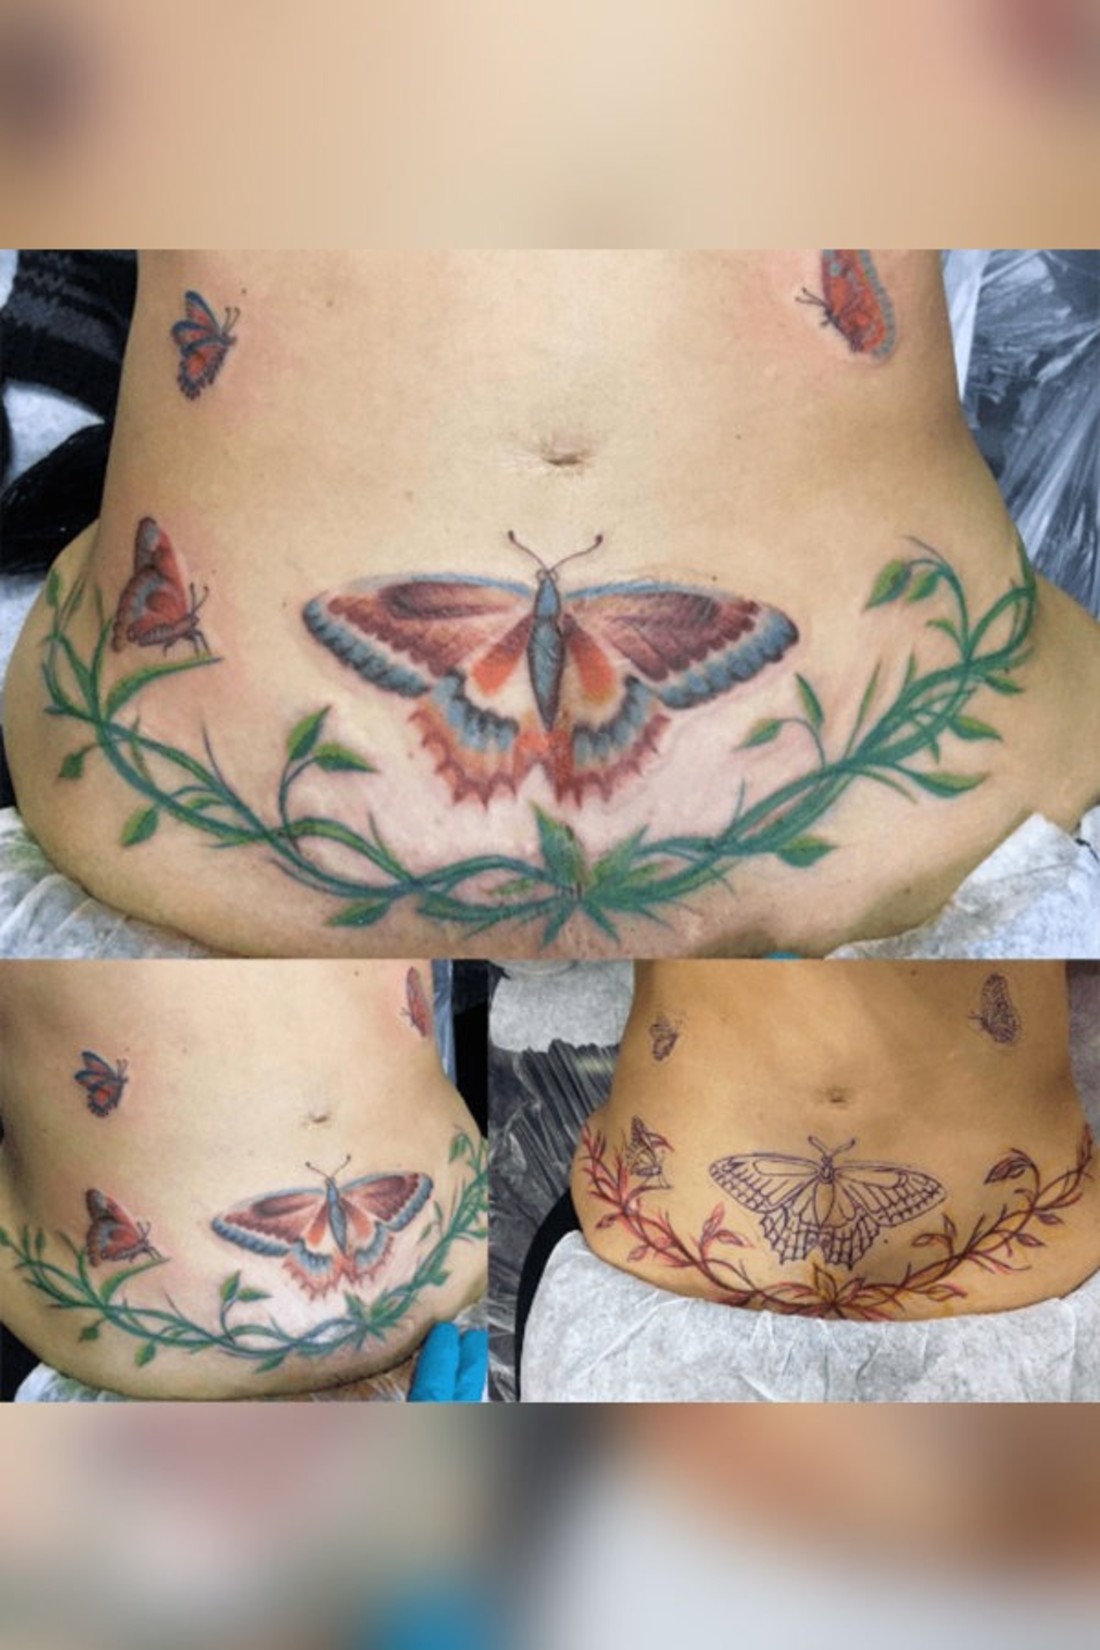 Share more than 75 c section tattoos best  thtantai2